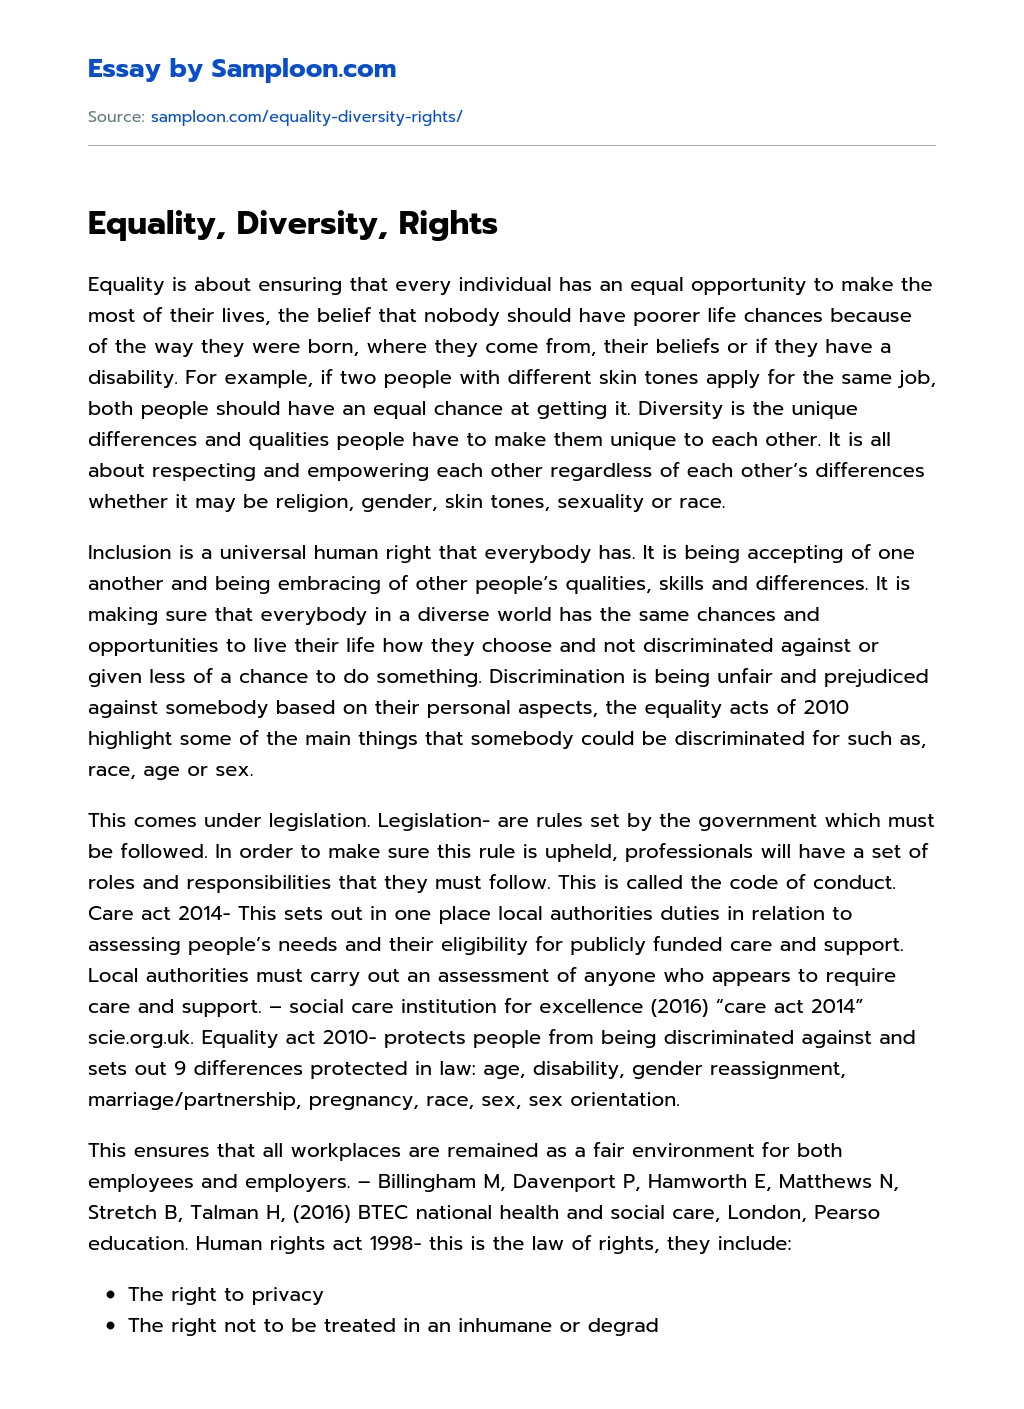 Equality, Diversity, Rights essay